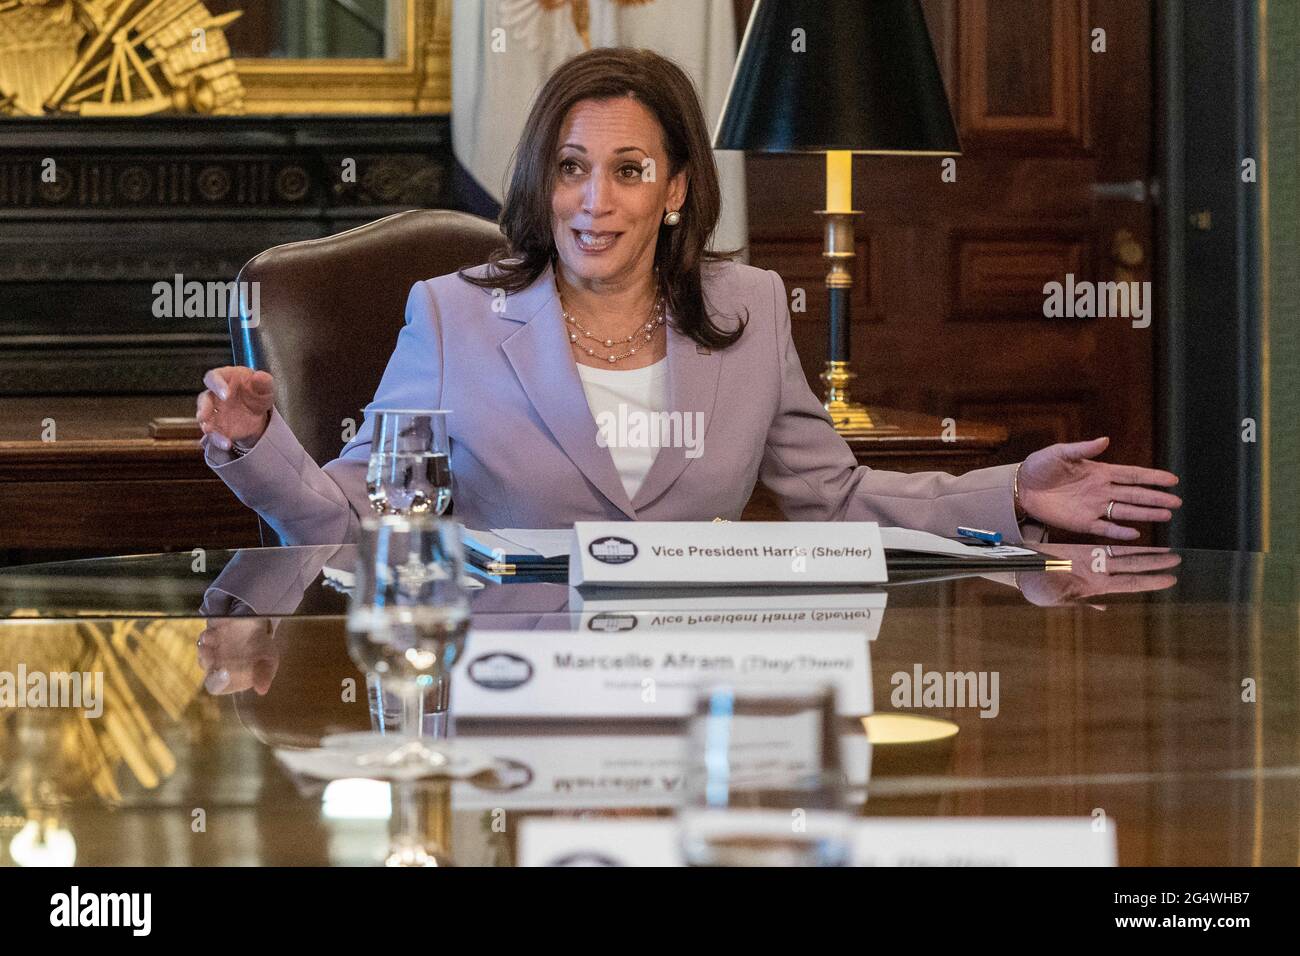 United States Vice President Kamala Harris holds a roundtable marking LGBTQ+ Pride Month in the VPâÂ€Â™s office of the Eisenhower Executive Office Building in Washington, U.S., June 23, 2021 in Washington DC. Photo by Ken Cedeno/Pool/ABACAPRESS.COM Stock Photo